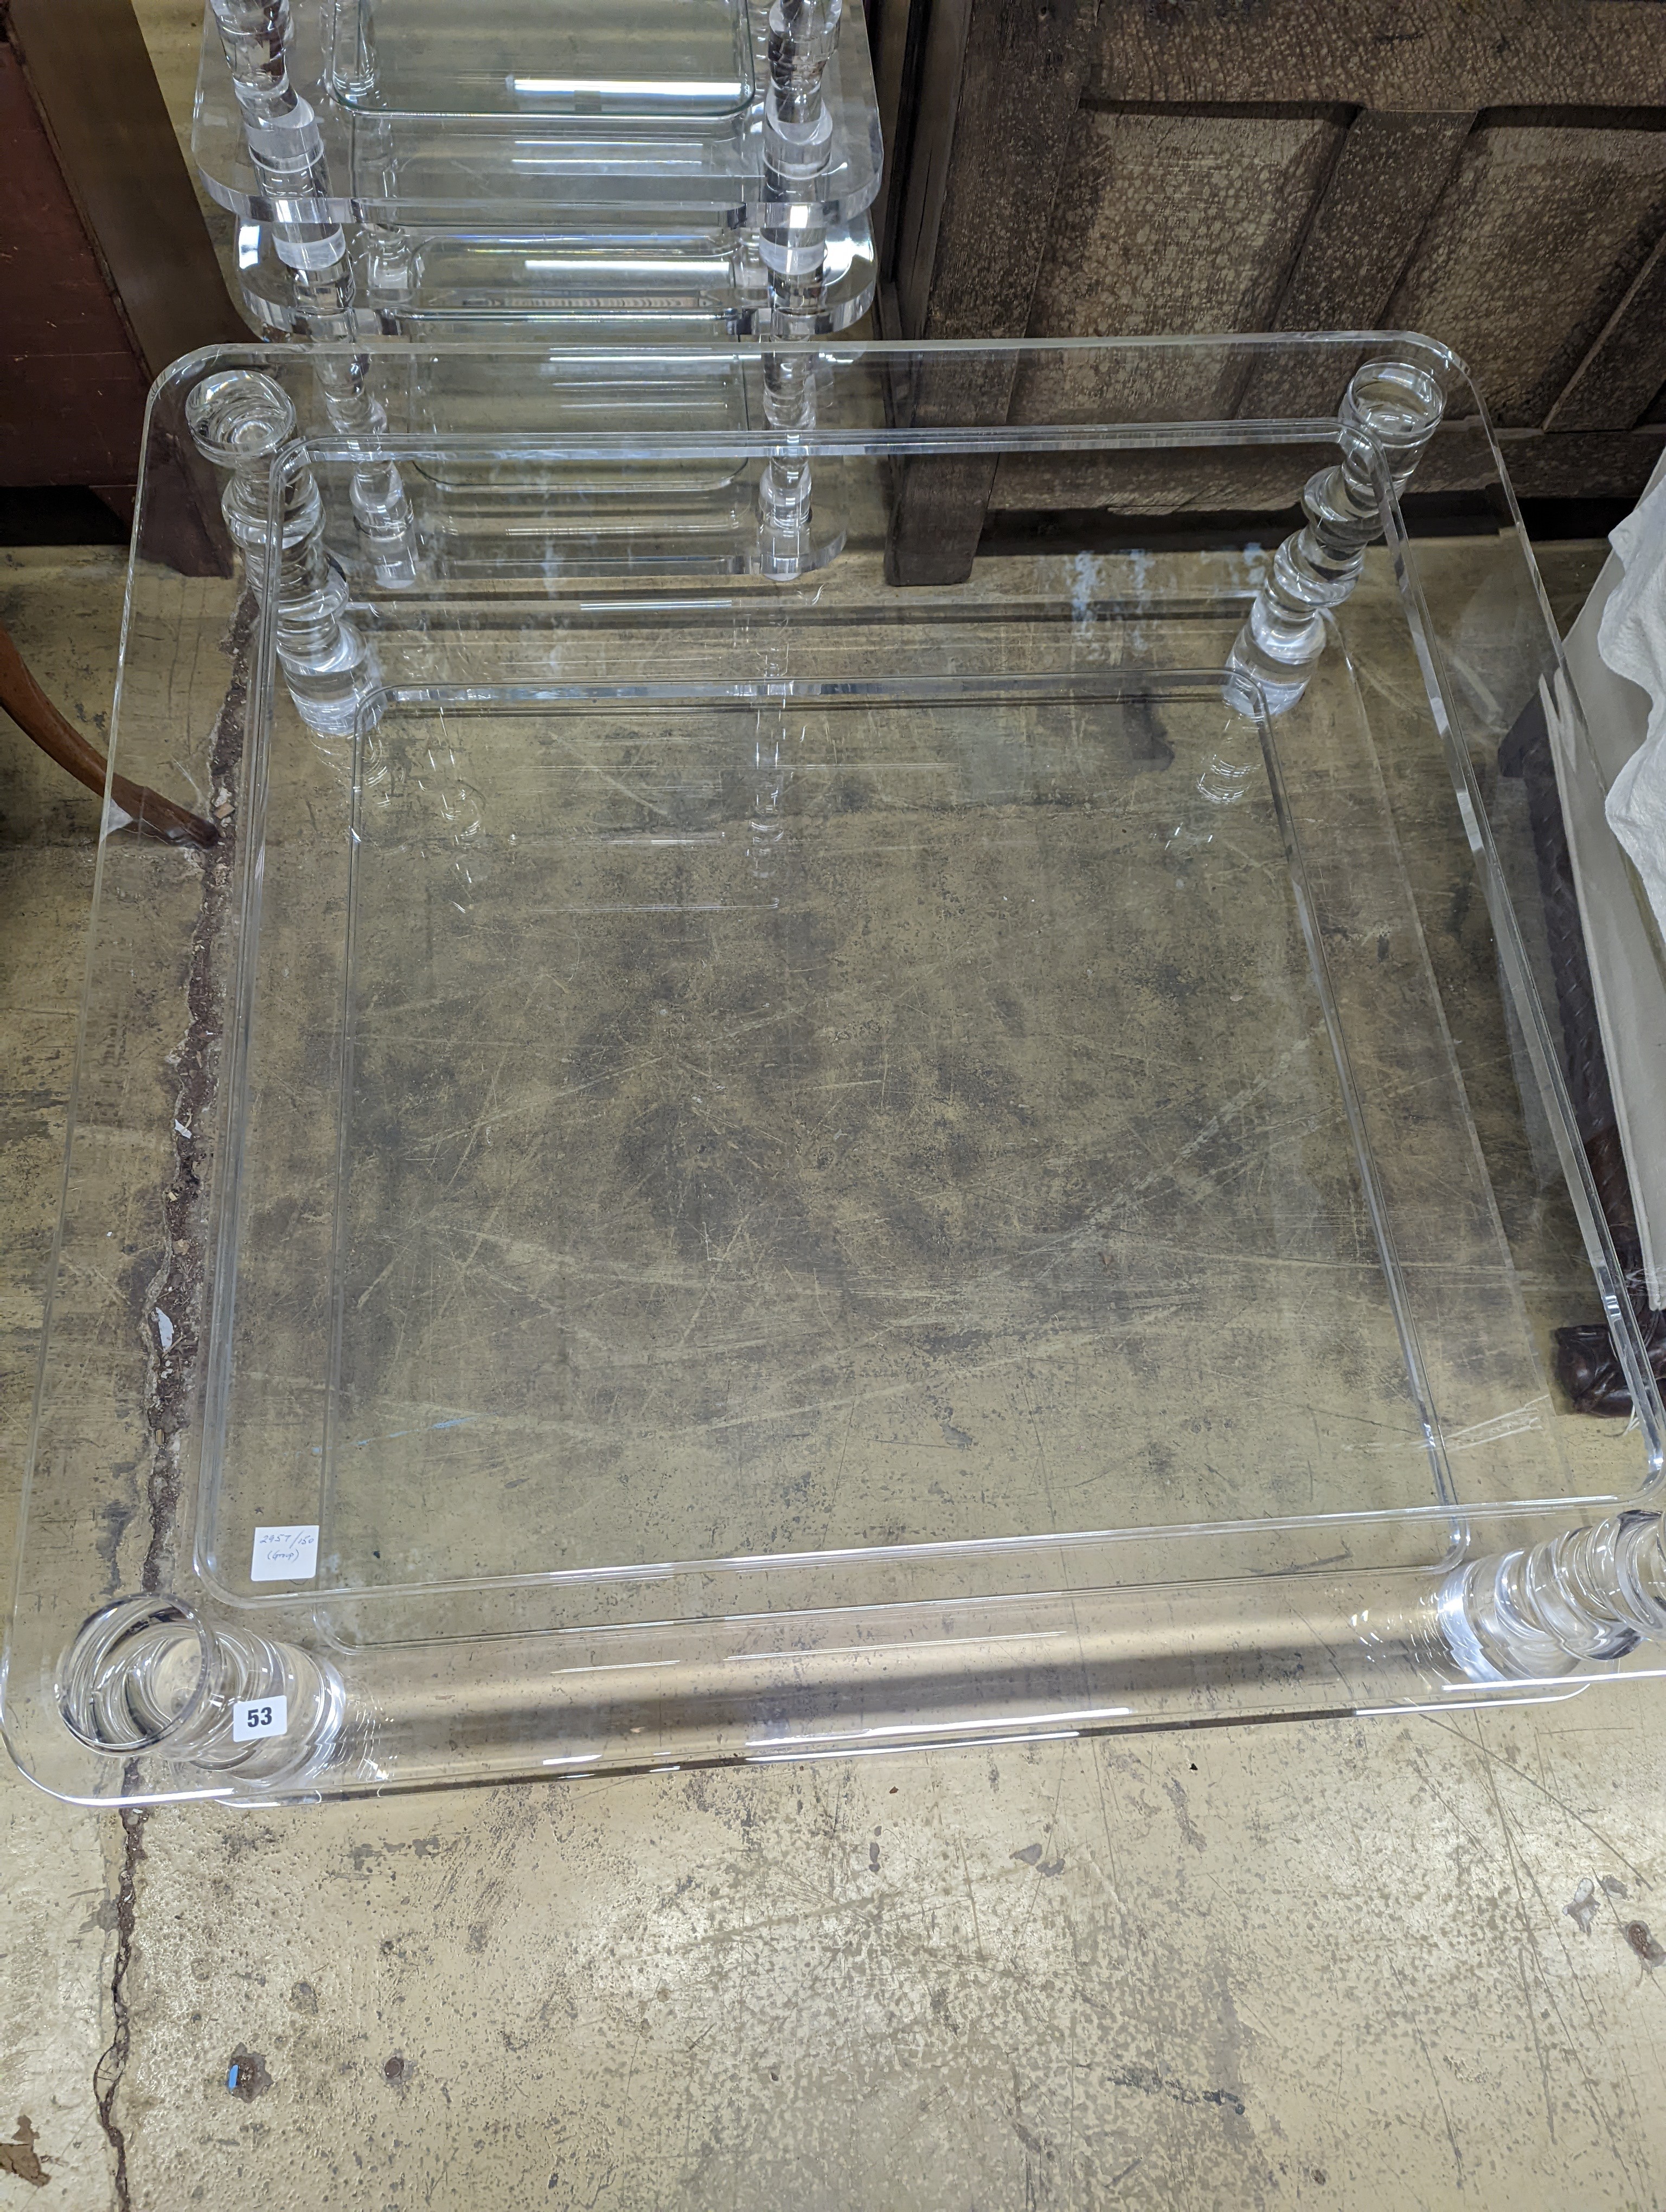 A contemporary square perspex and glass two tier coffee table, length 120cm, depth 40cm